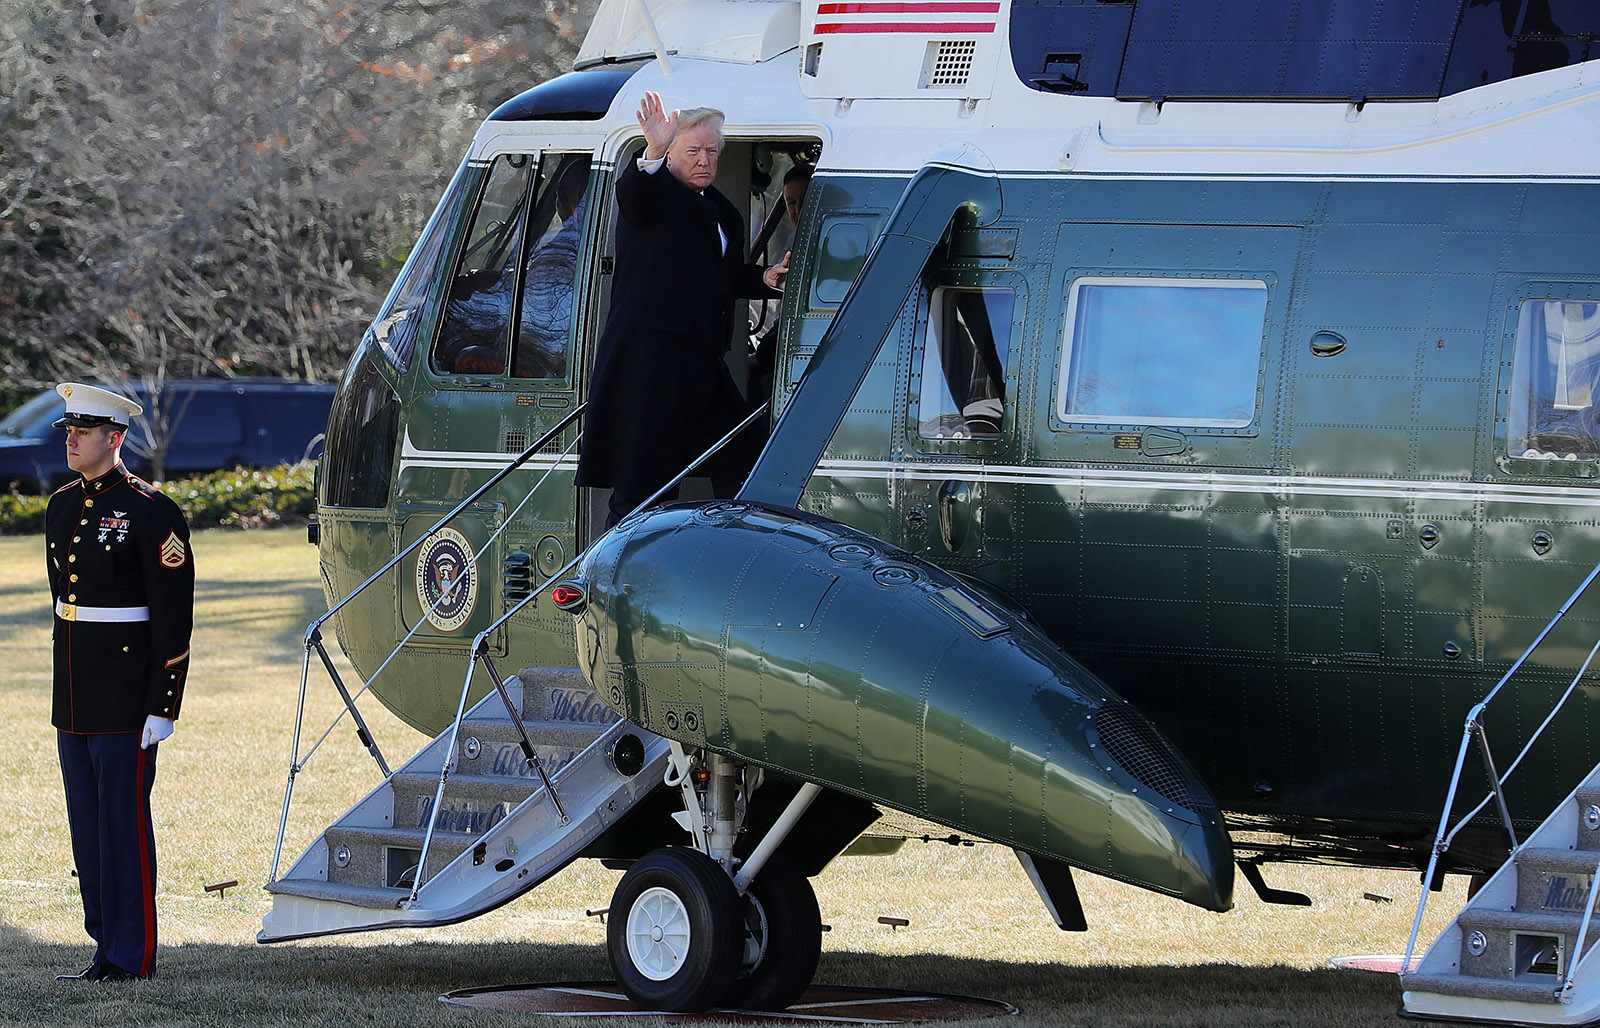 President Donald Trump waving to journalists as he boarded Marine One to leave the White House, Washington, D.C., February 5, 2018